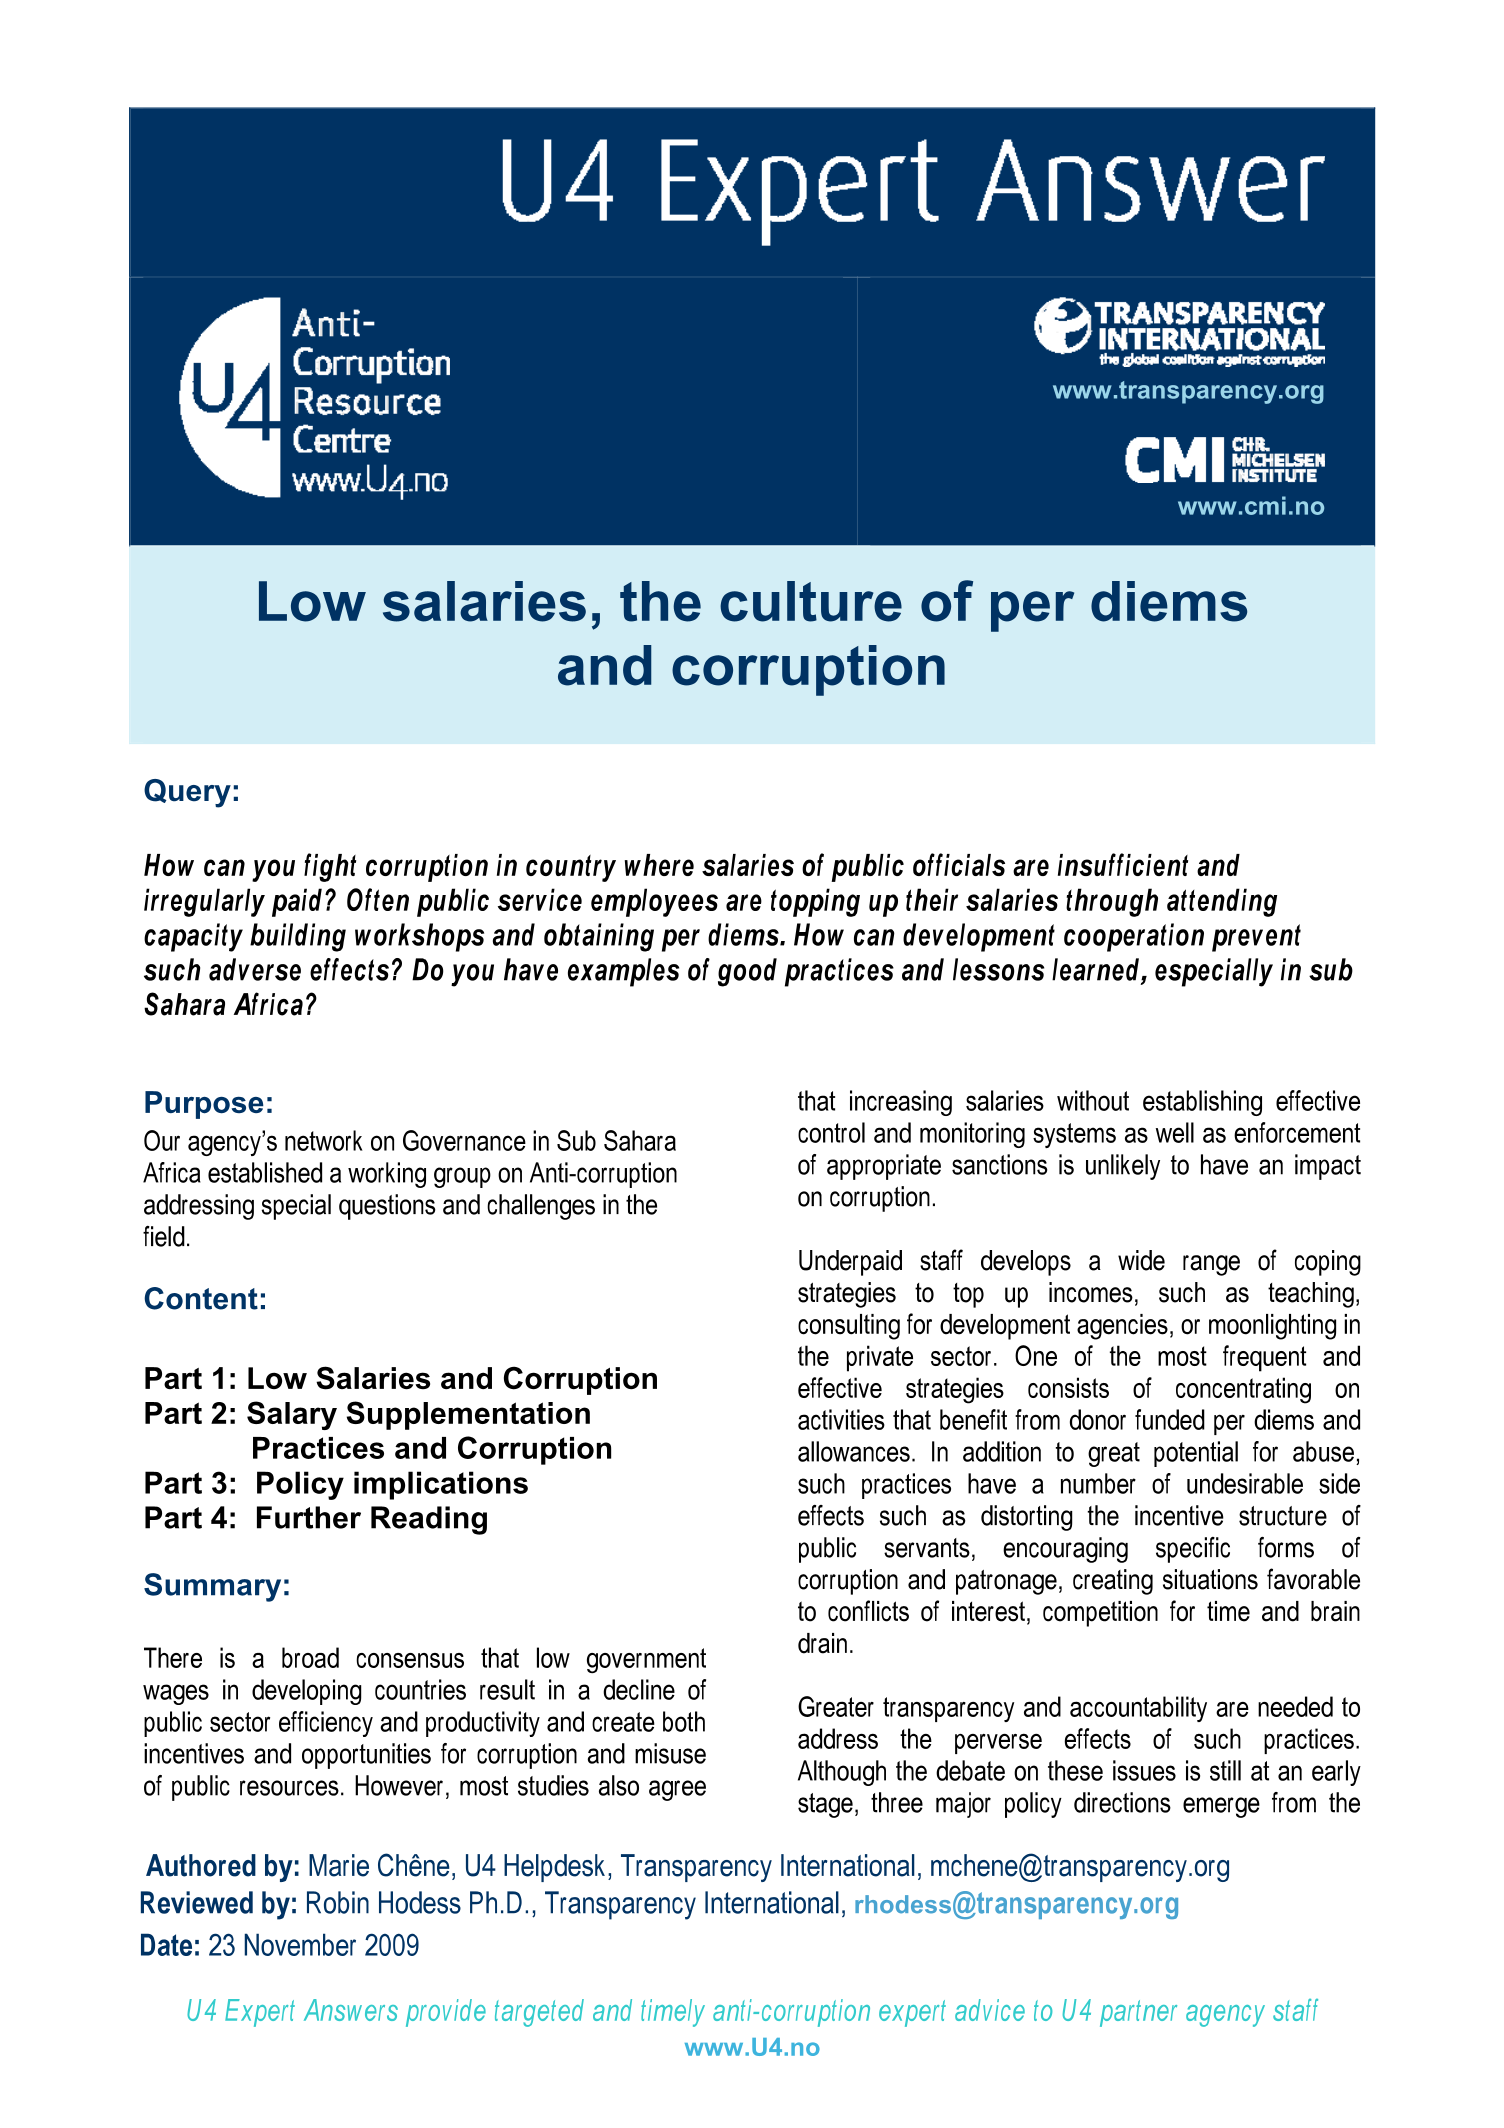 Low salaries, the culture of per diems and corruption 